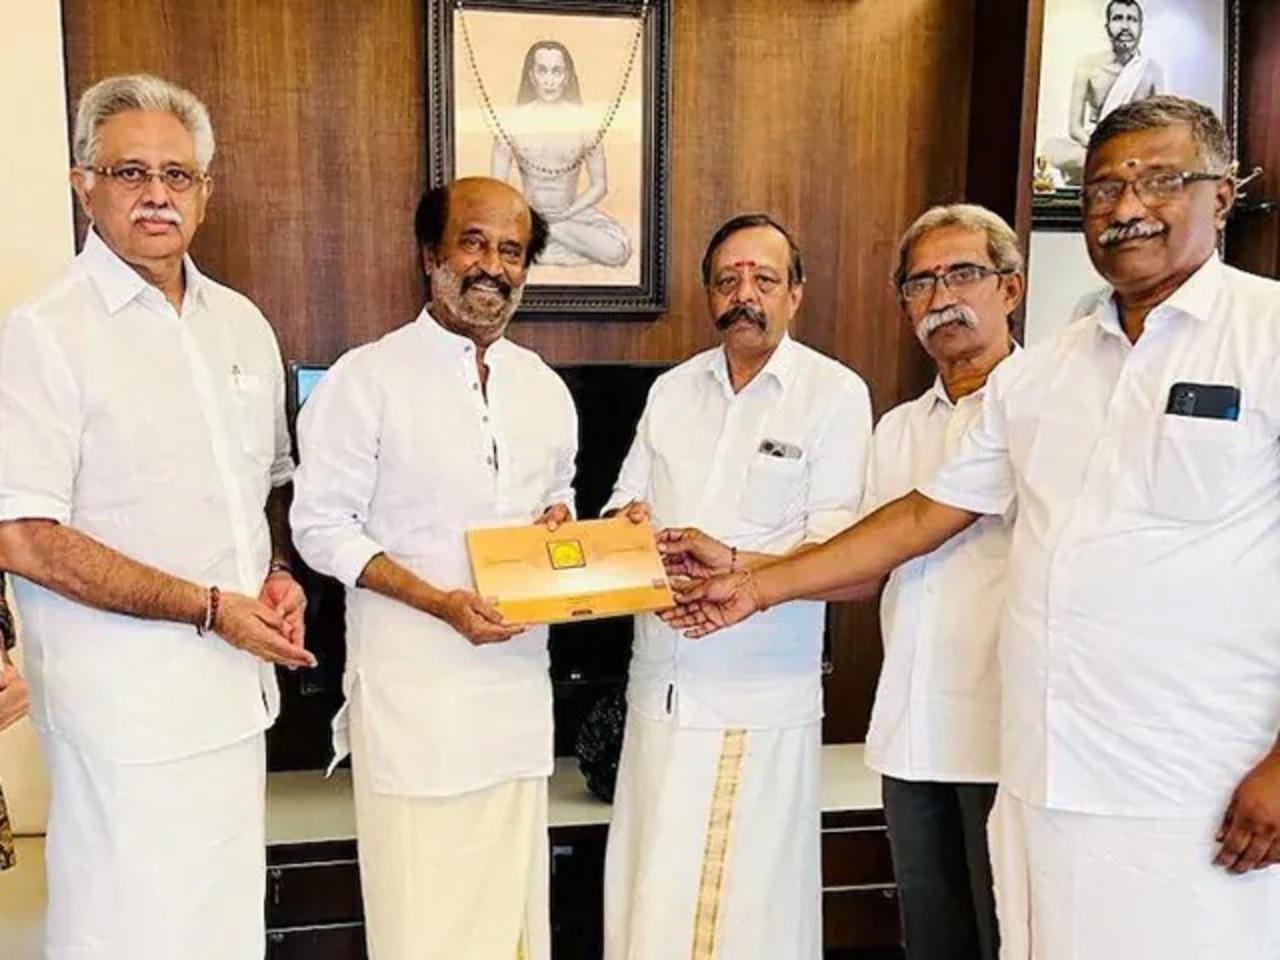 Pan-India star Rajinikanth has also been asked to grace the temple inauguration with his presence